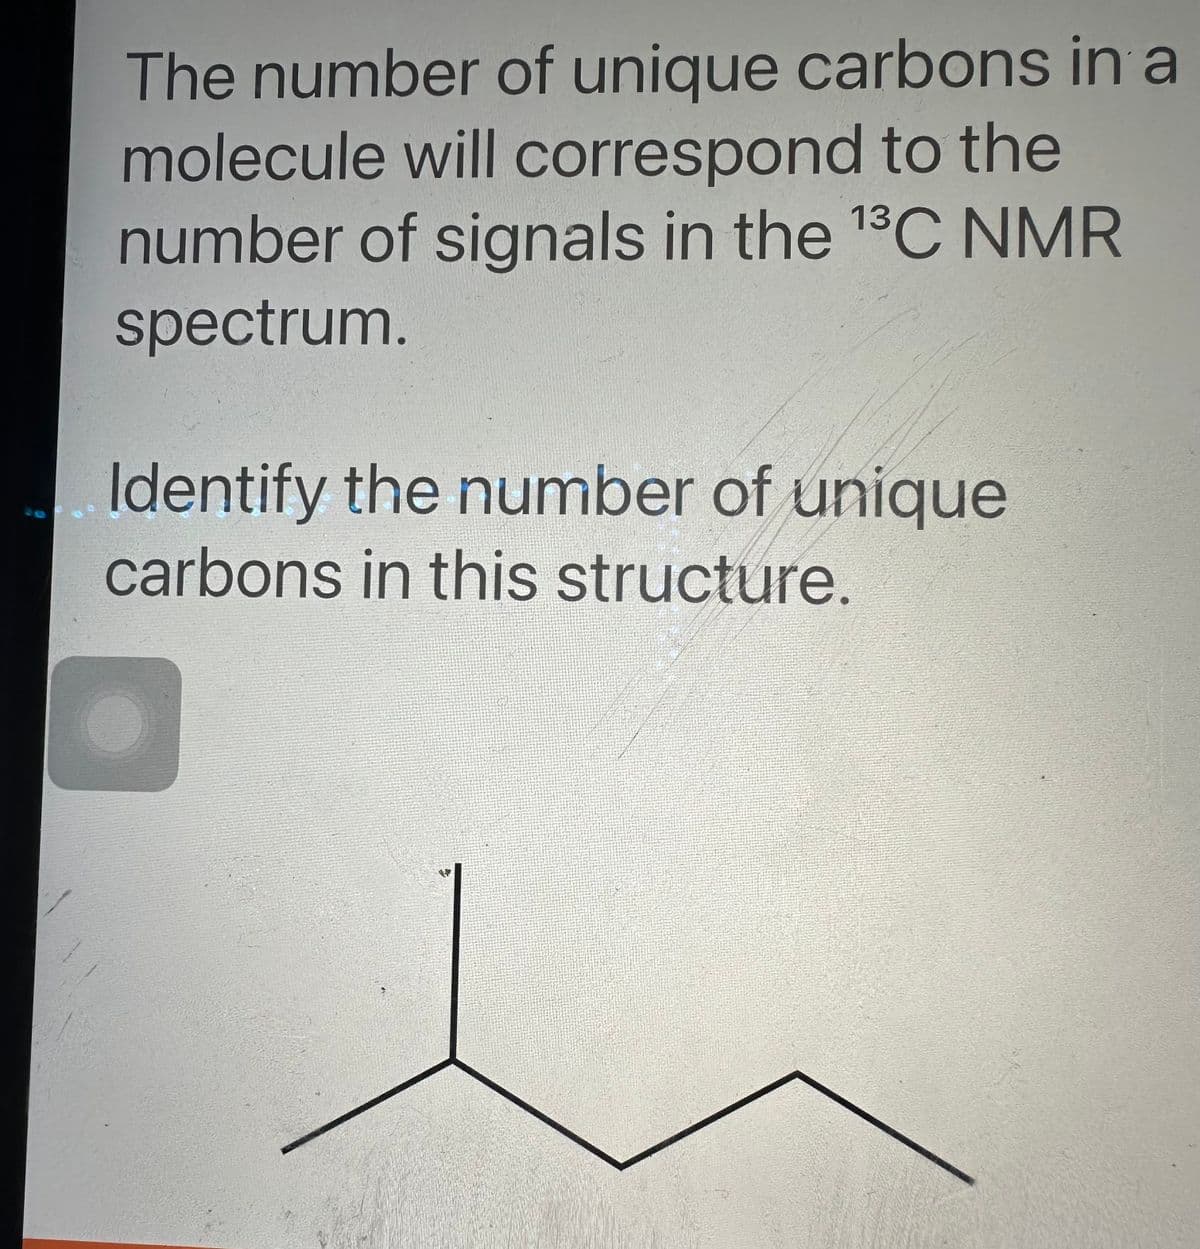 The number of unique carbons in a
molecule will correspond to the
number of signals in the ¹³C NMR
spectrum.
13
Identify the number of unique
carbons in this structure.